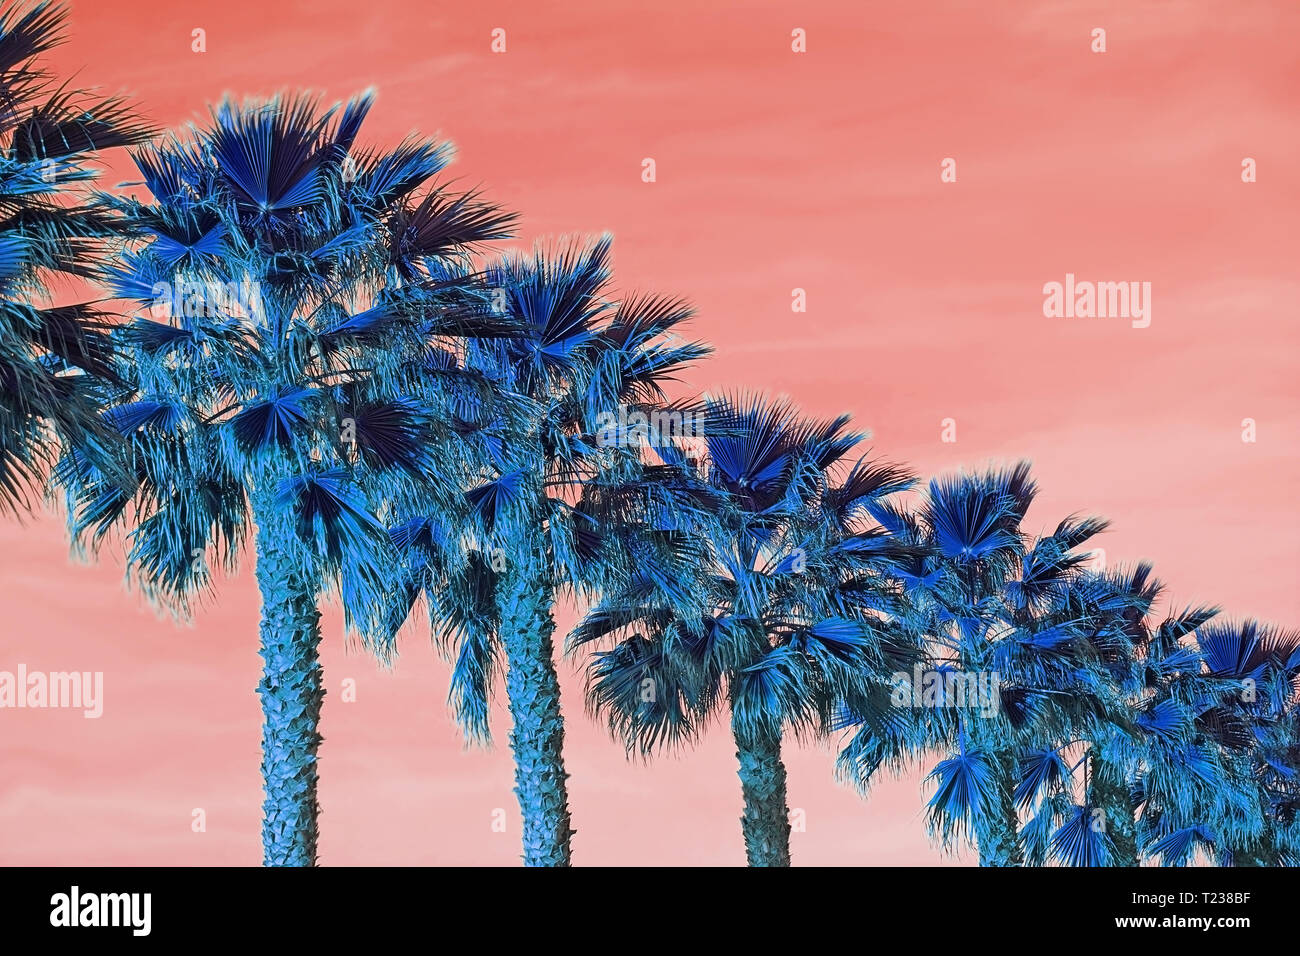 Palm trees seen from below on color Living Coral sky background Stock Photo